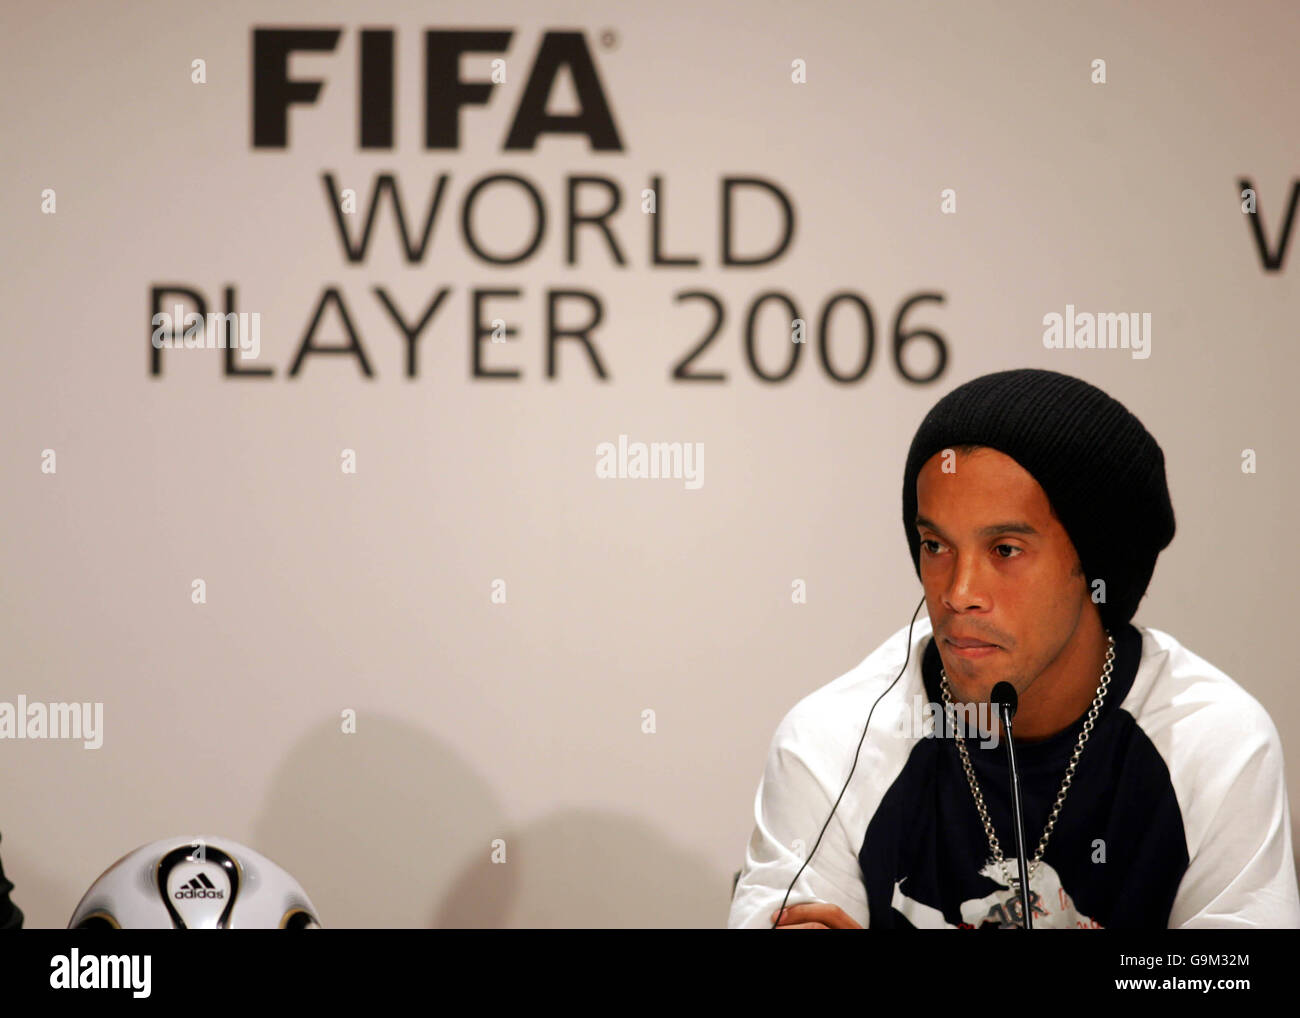 Brazil's Ronaldinho at the press conference for the FIFA World Player of the Year 2006 Stock Photo